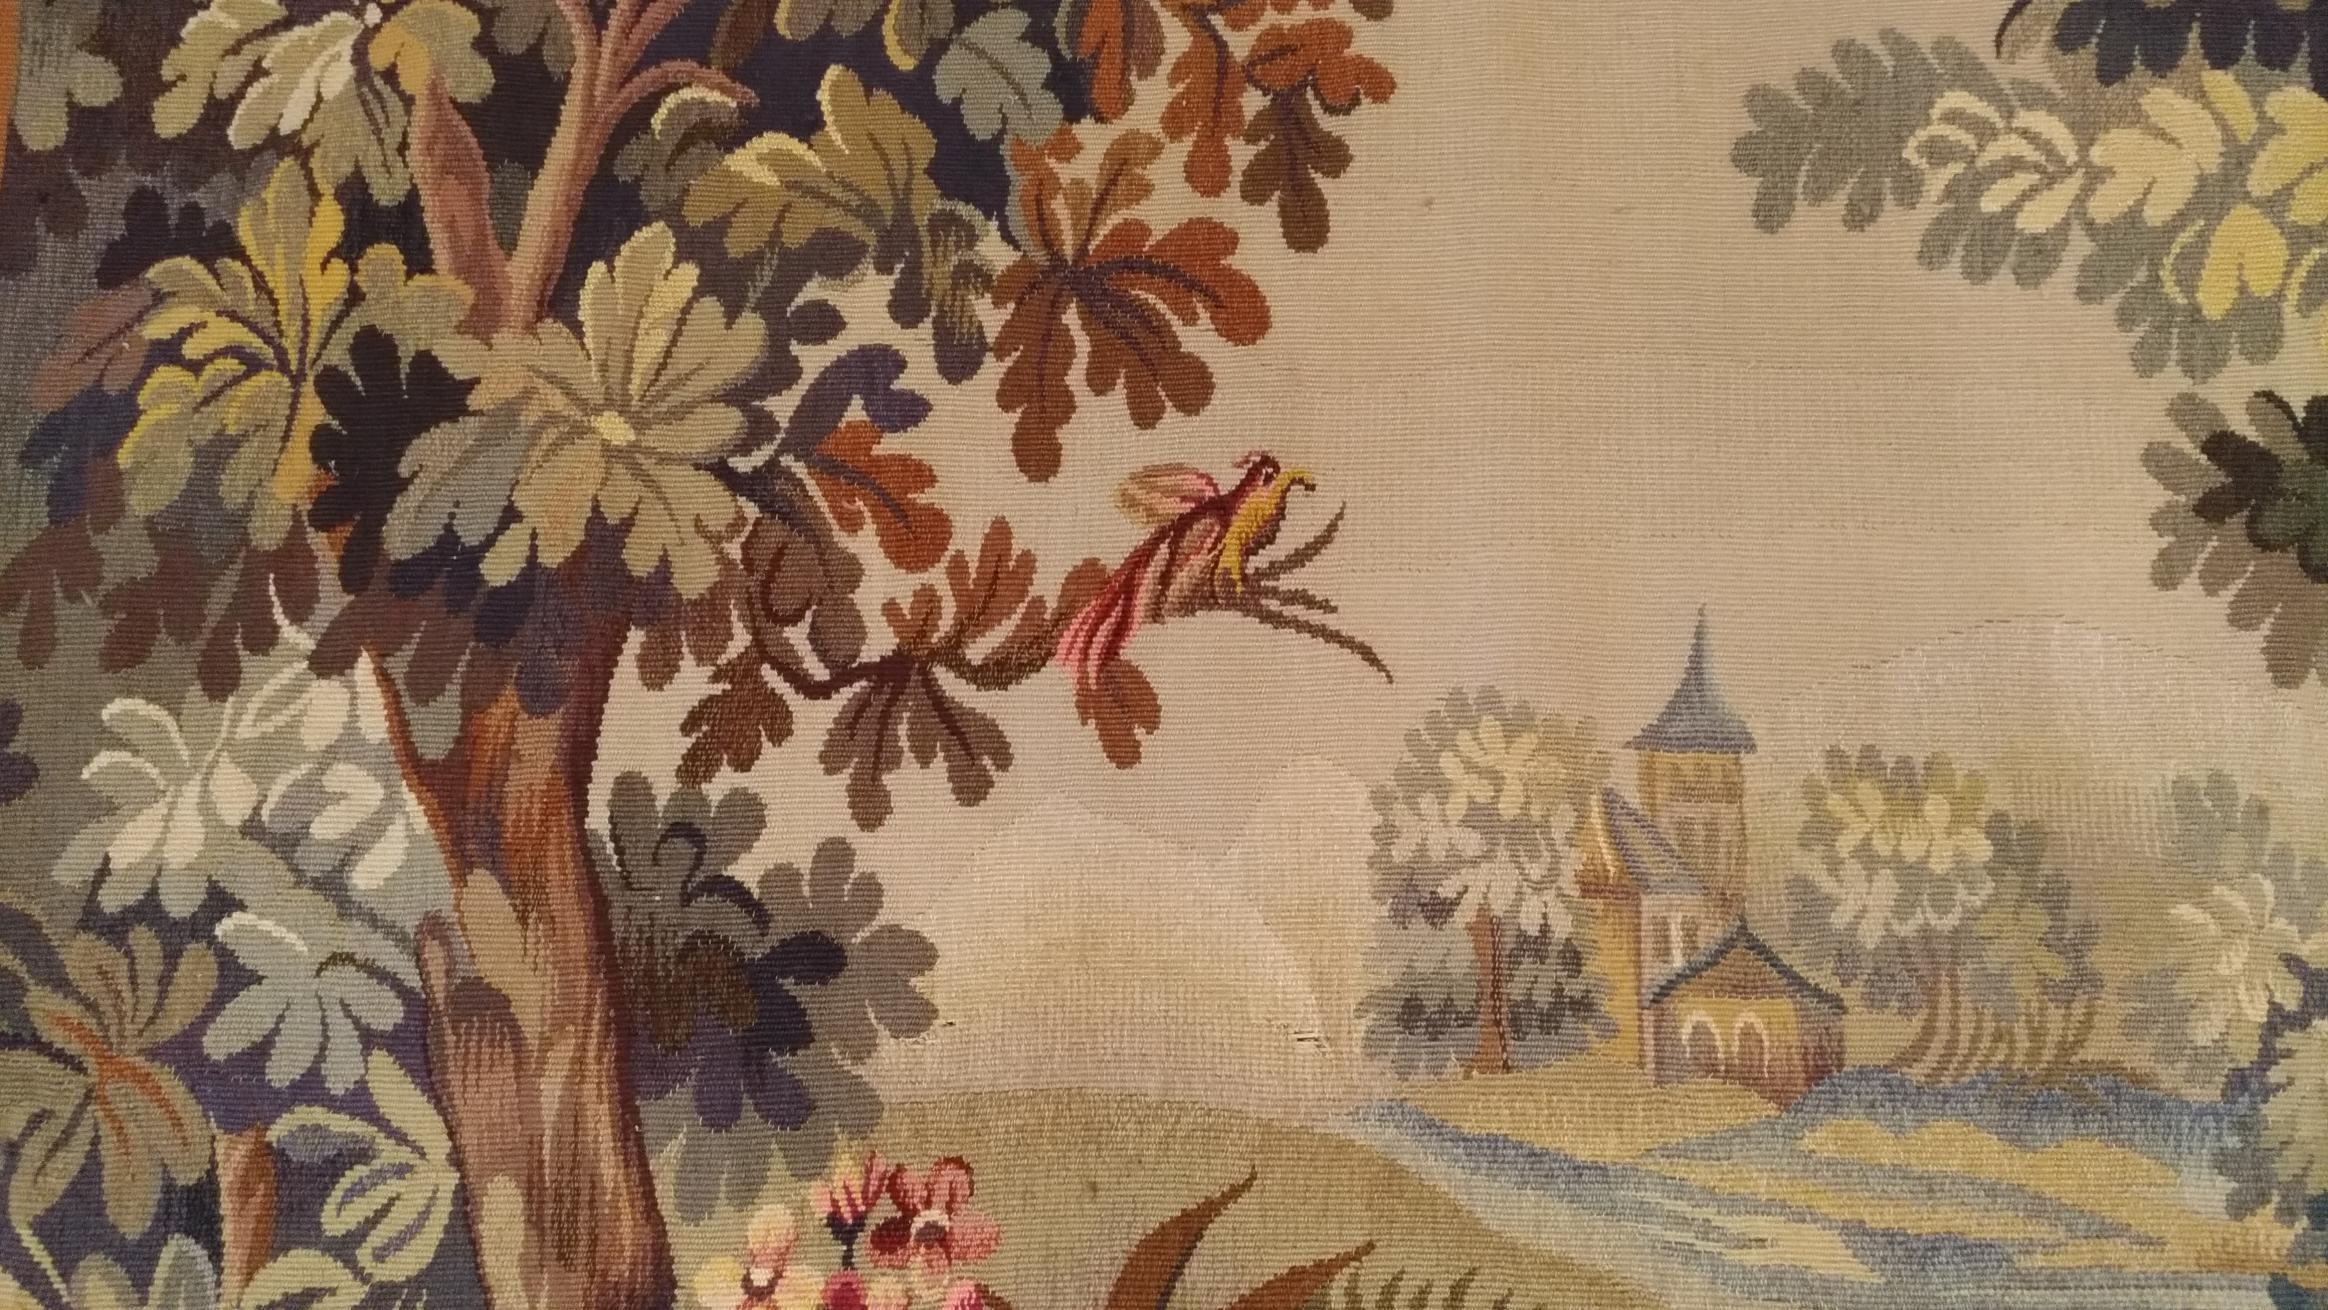 1025 - 19th century French Aubusson tapestry depicting a landscape scene with flora and fauna in rich colors, and exhibiting a Classic style perfect for many types of décor, Circa 1880.